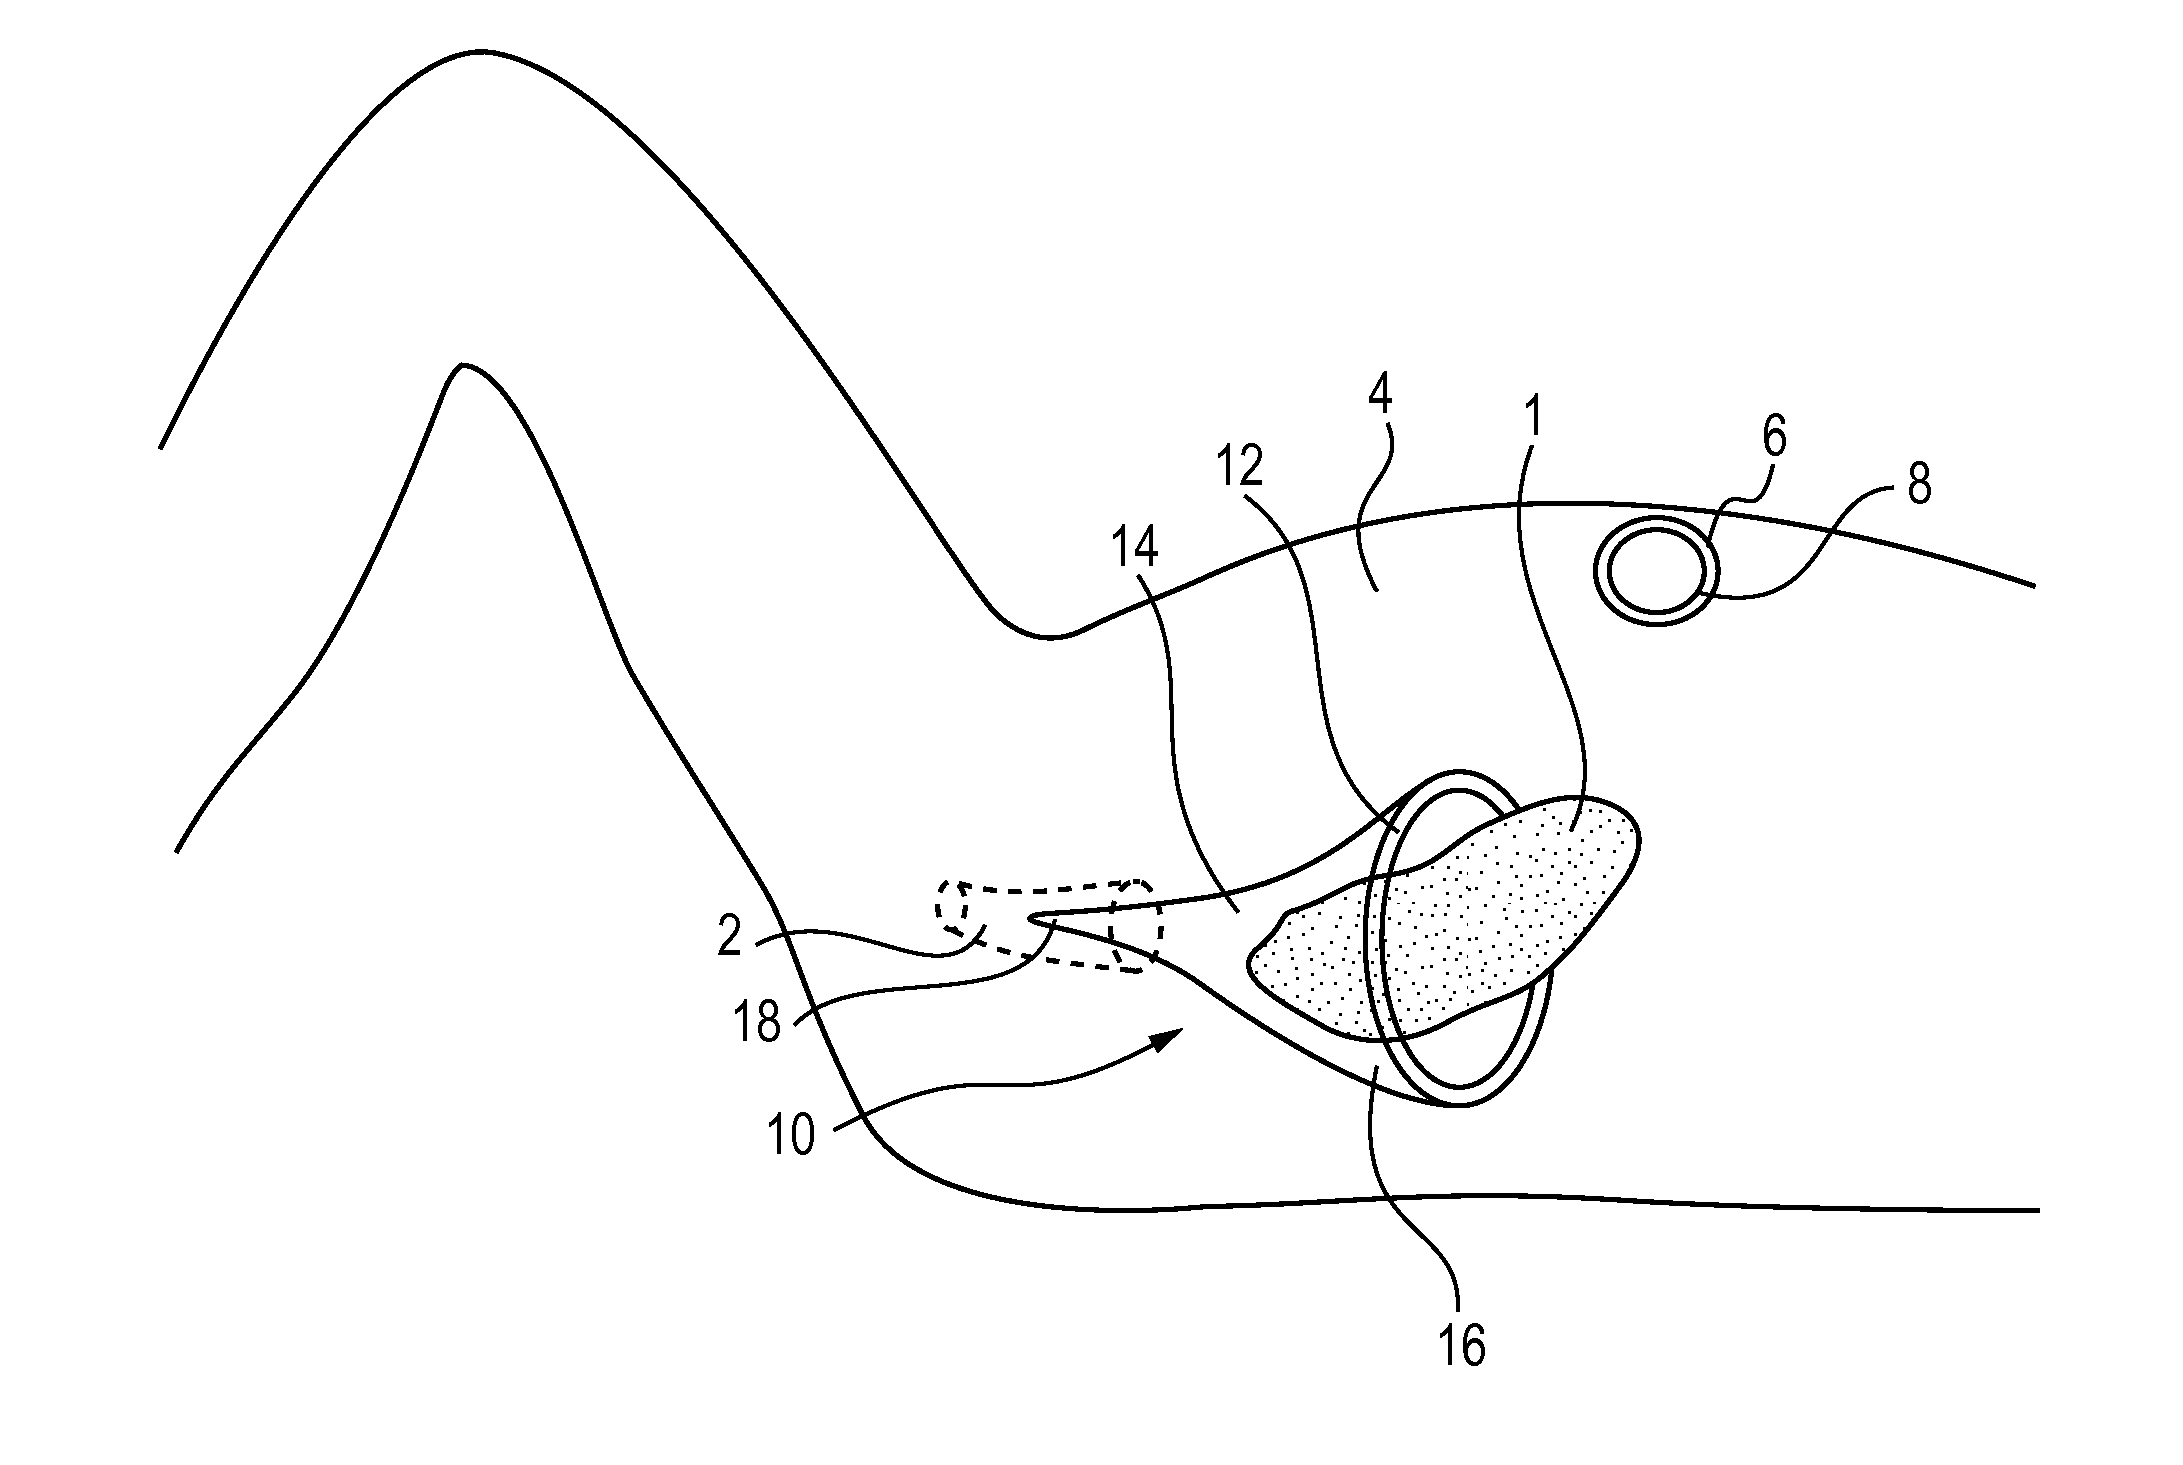 Methods for Isolating and Removing Tissue During a Female Patient's Laparoscopic Surgery